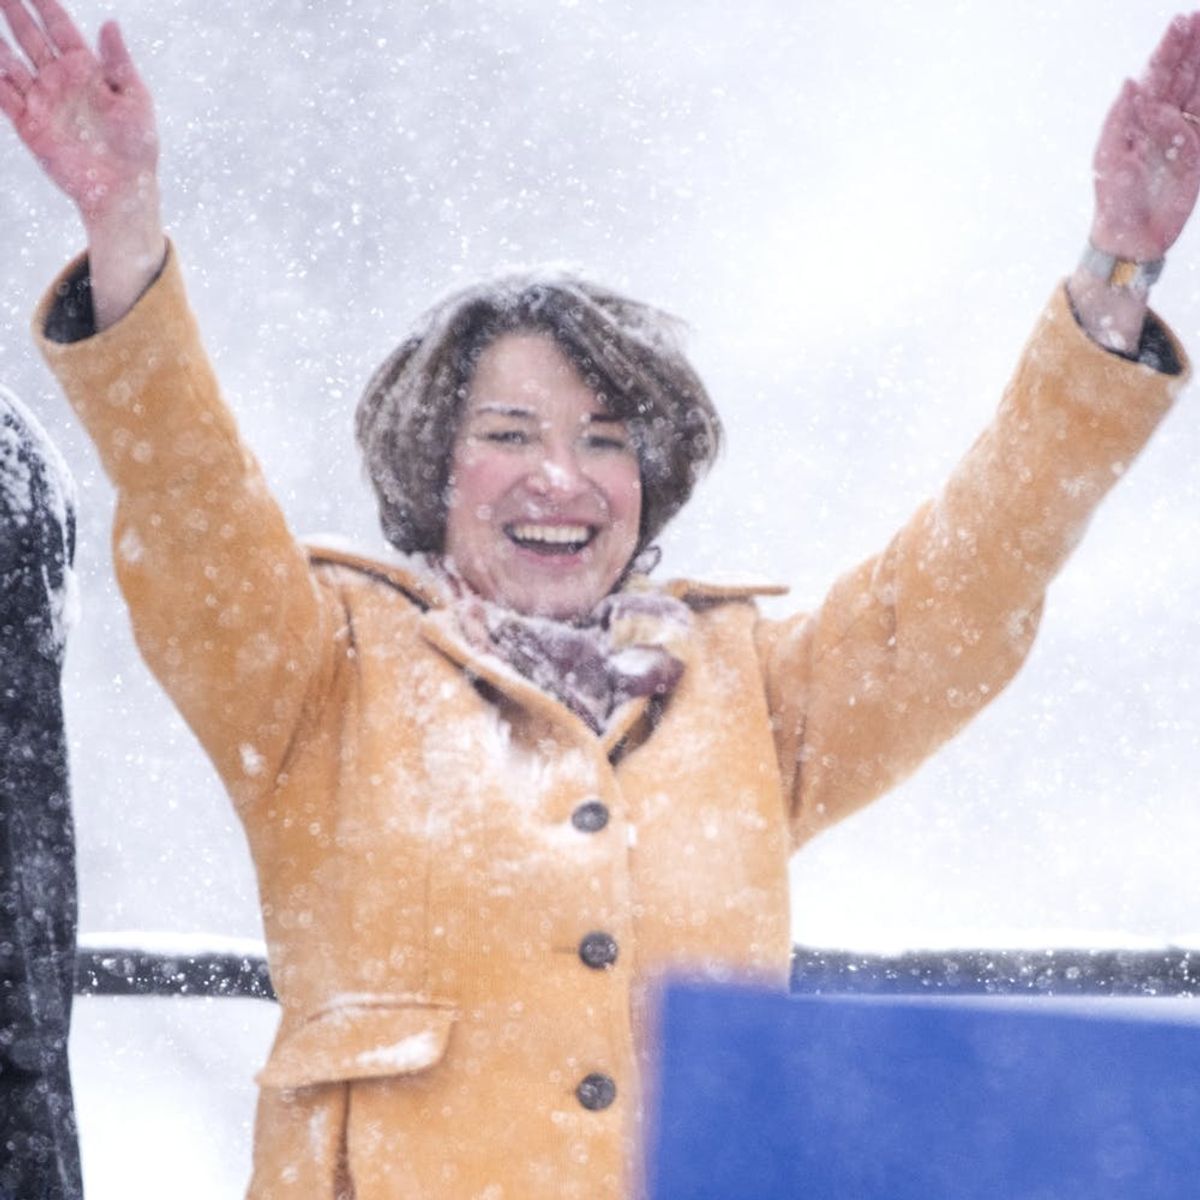 Staff Mistreatment Allegations Against Amy Klobuchar Call Up Lessons from #MeToo